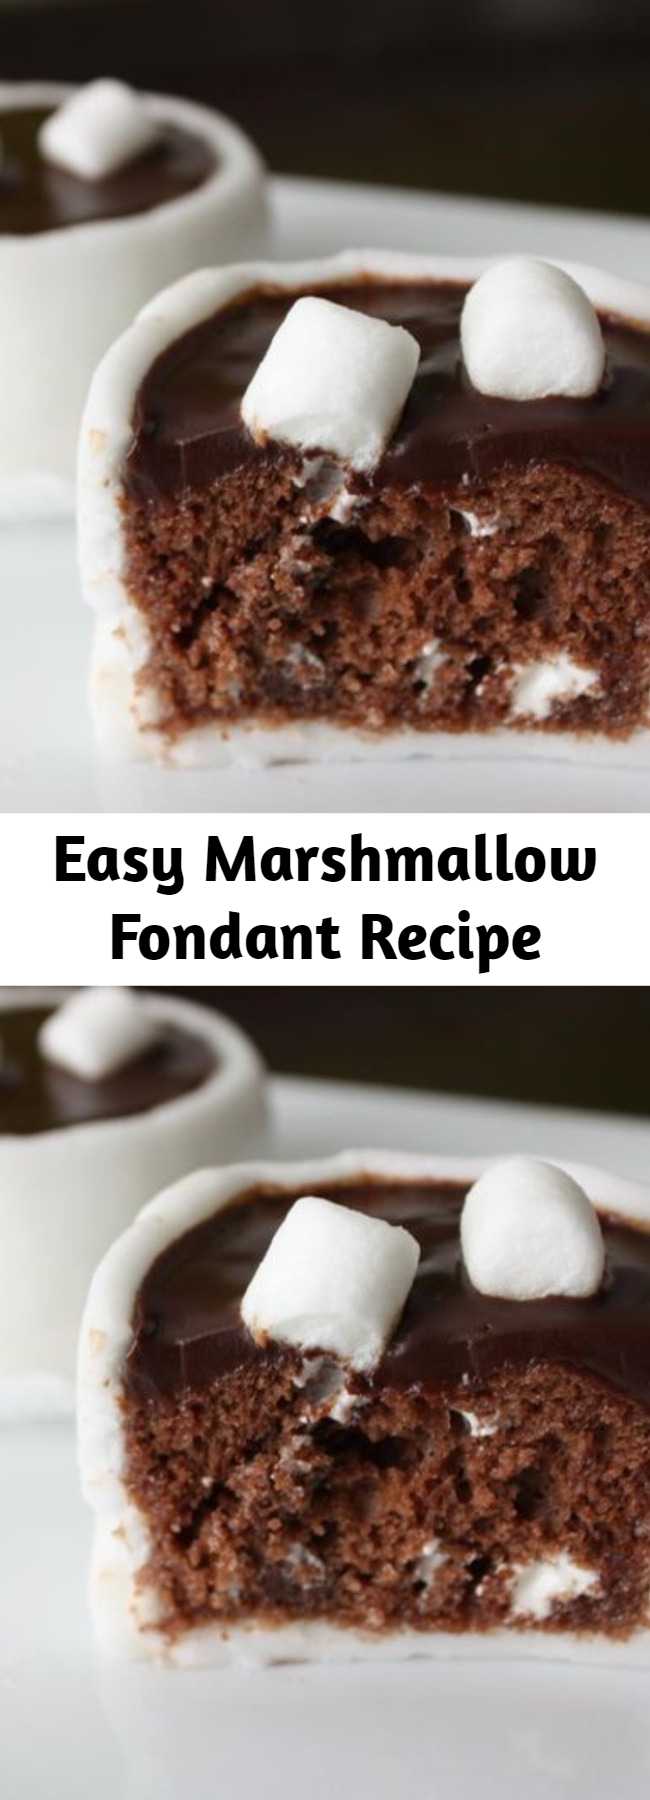 Easy Marshmallow Fondant Recipe - This is a very easy (and a little sticky at times) way to make a delicious fondant. It's great on cakes, cookies, or just for your little ones to play with! Leftovers will save in a tightly sealed container for a few weeks.